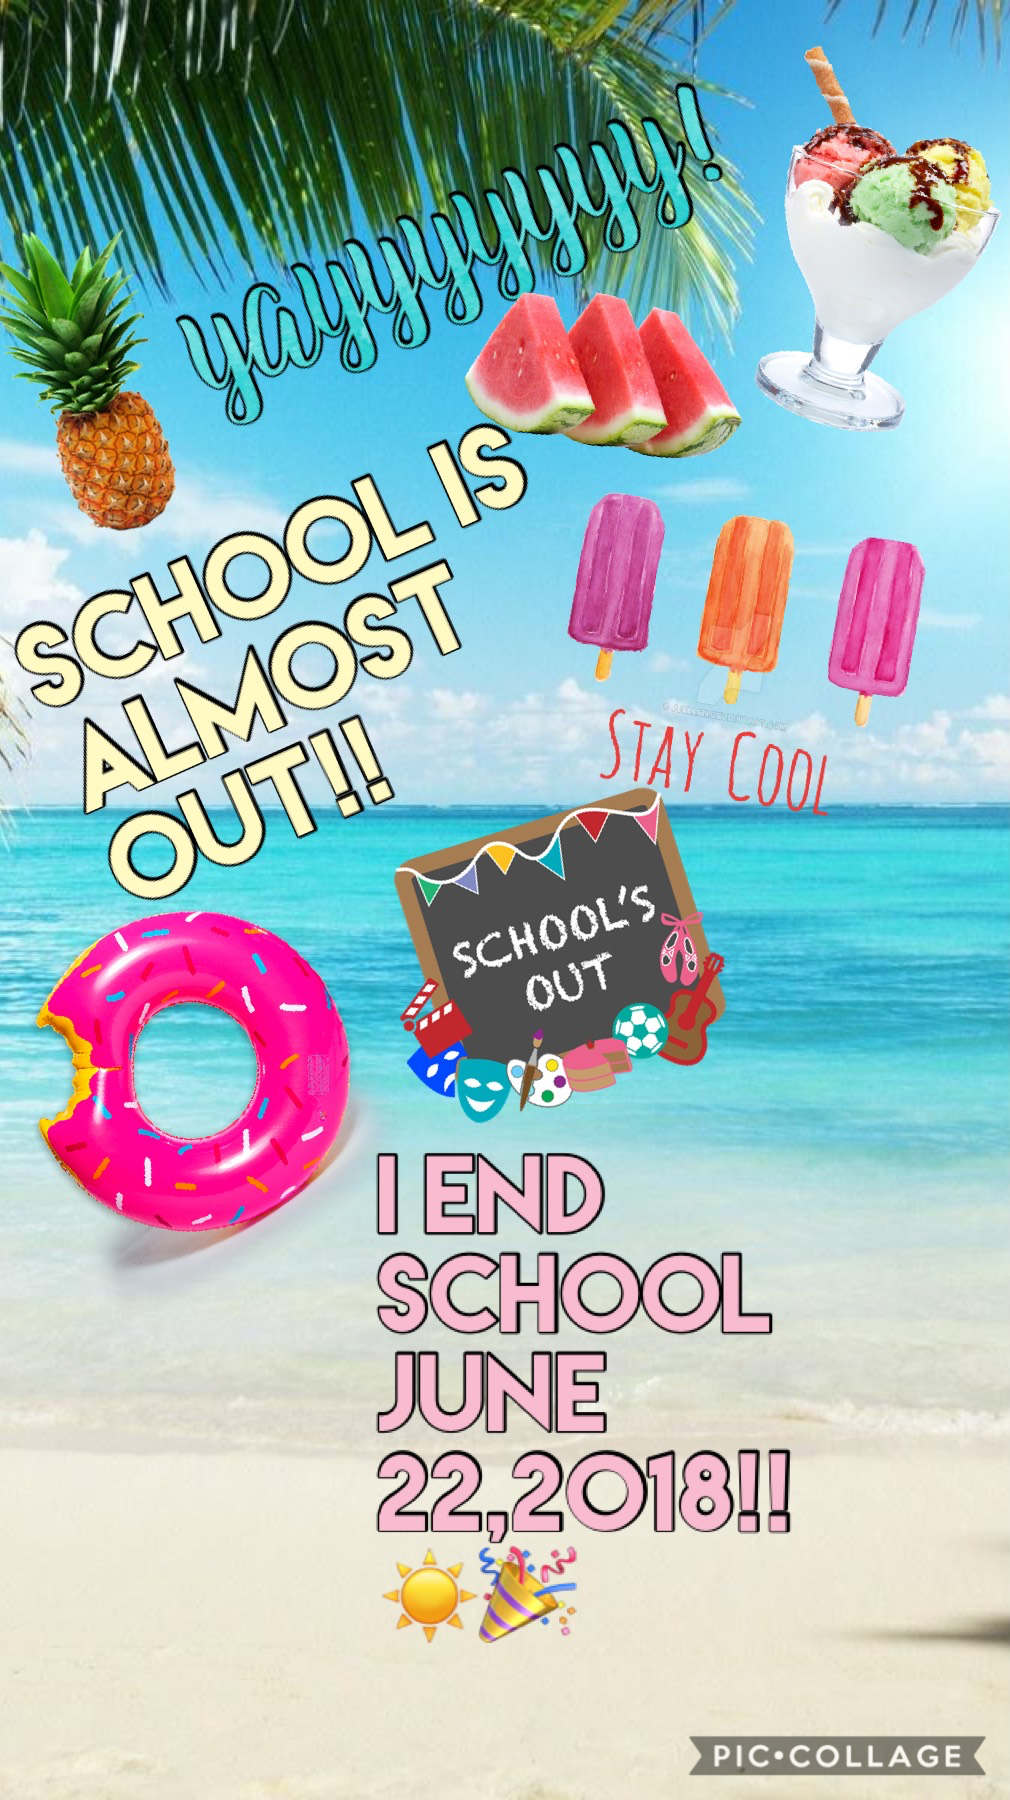 Tap!!🎉💗☀️😁🍍🍉

School is almost out!I finish school on June 22, 2018!!🎉🎉Finals for me ended yesterday!! YAYY!!GET READY FOR HUGE SPAM DURING SUMMER!😱💖🍉☀️